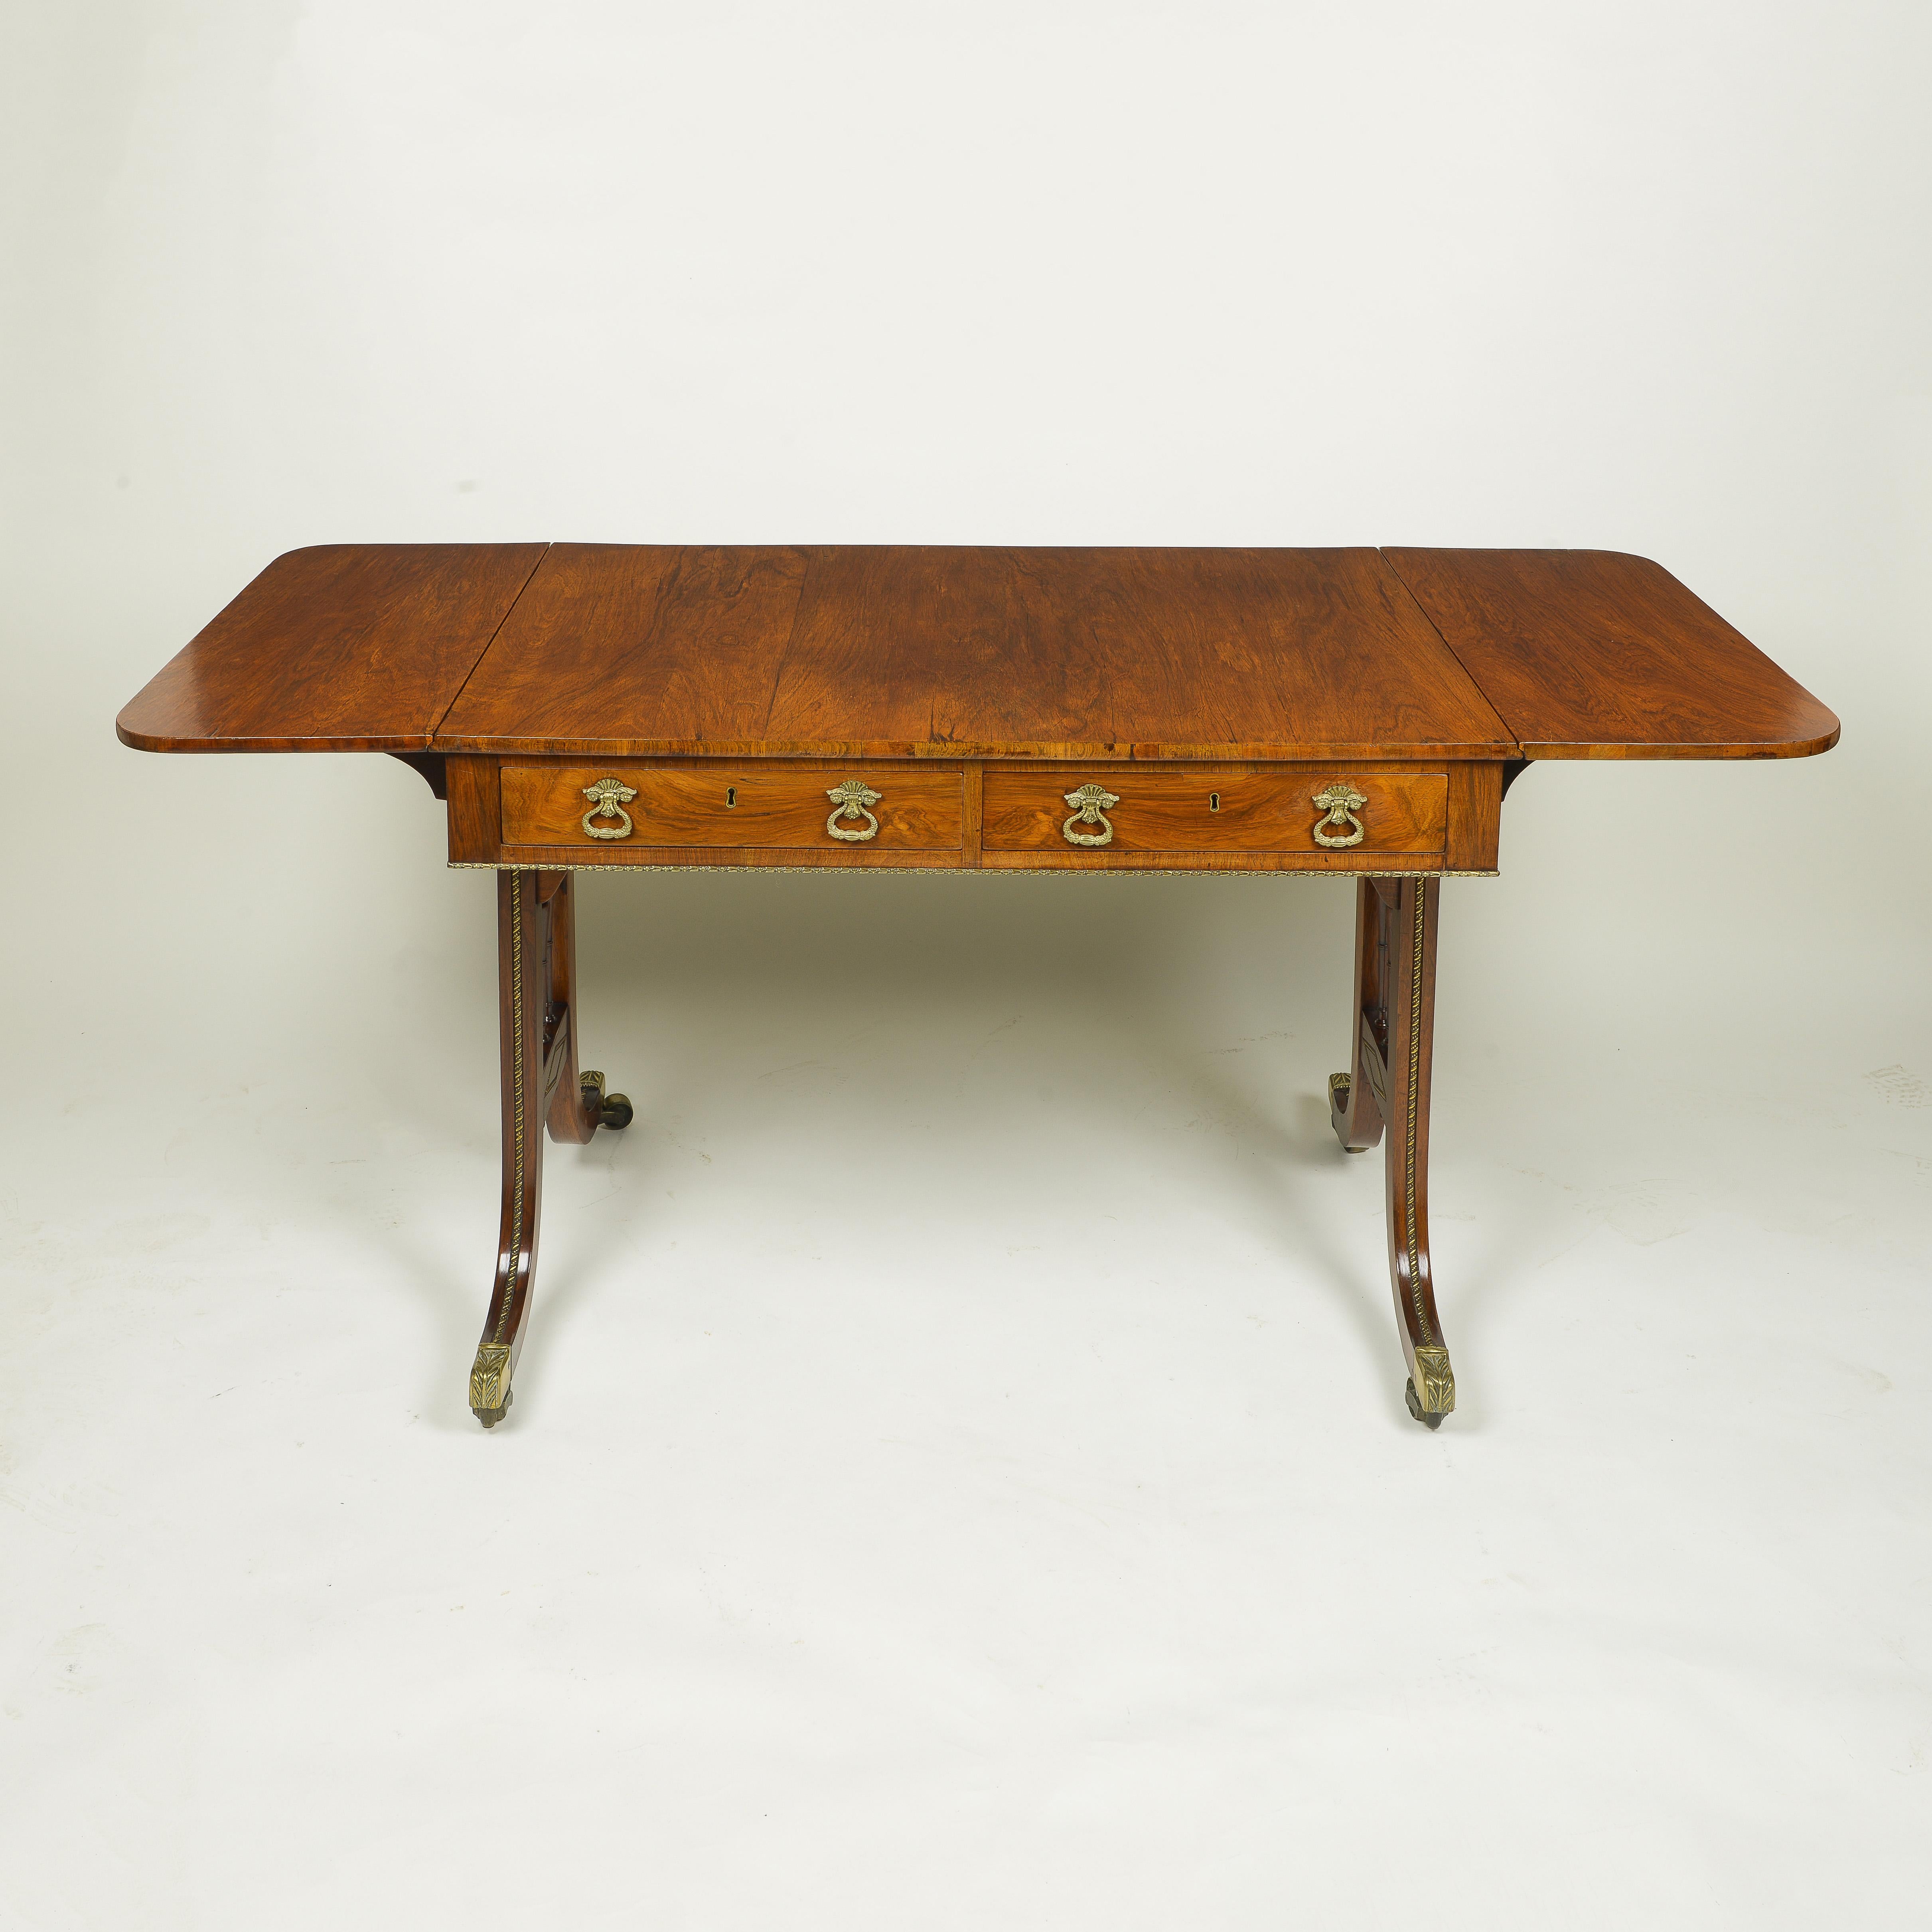 The rectangular top with rounded drop-ends, fitted with two frieze drawers with drop handles; raised on ring-turned end supports inlaid with bead-and-reel gilt-metal banding, terminating in foliate-cast caps and casters. 

Measures : Width: 37.75